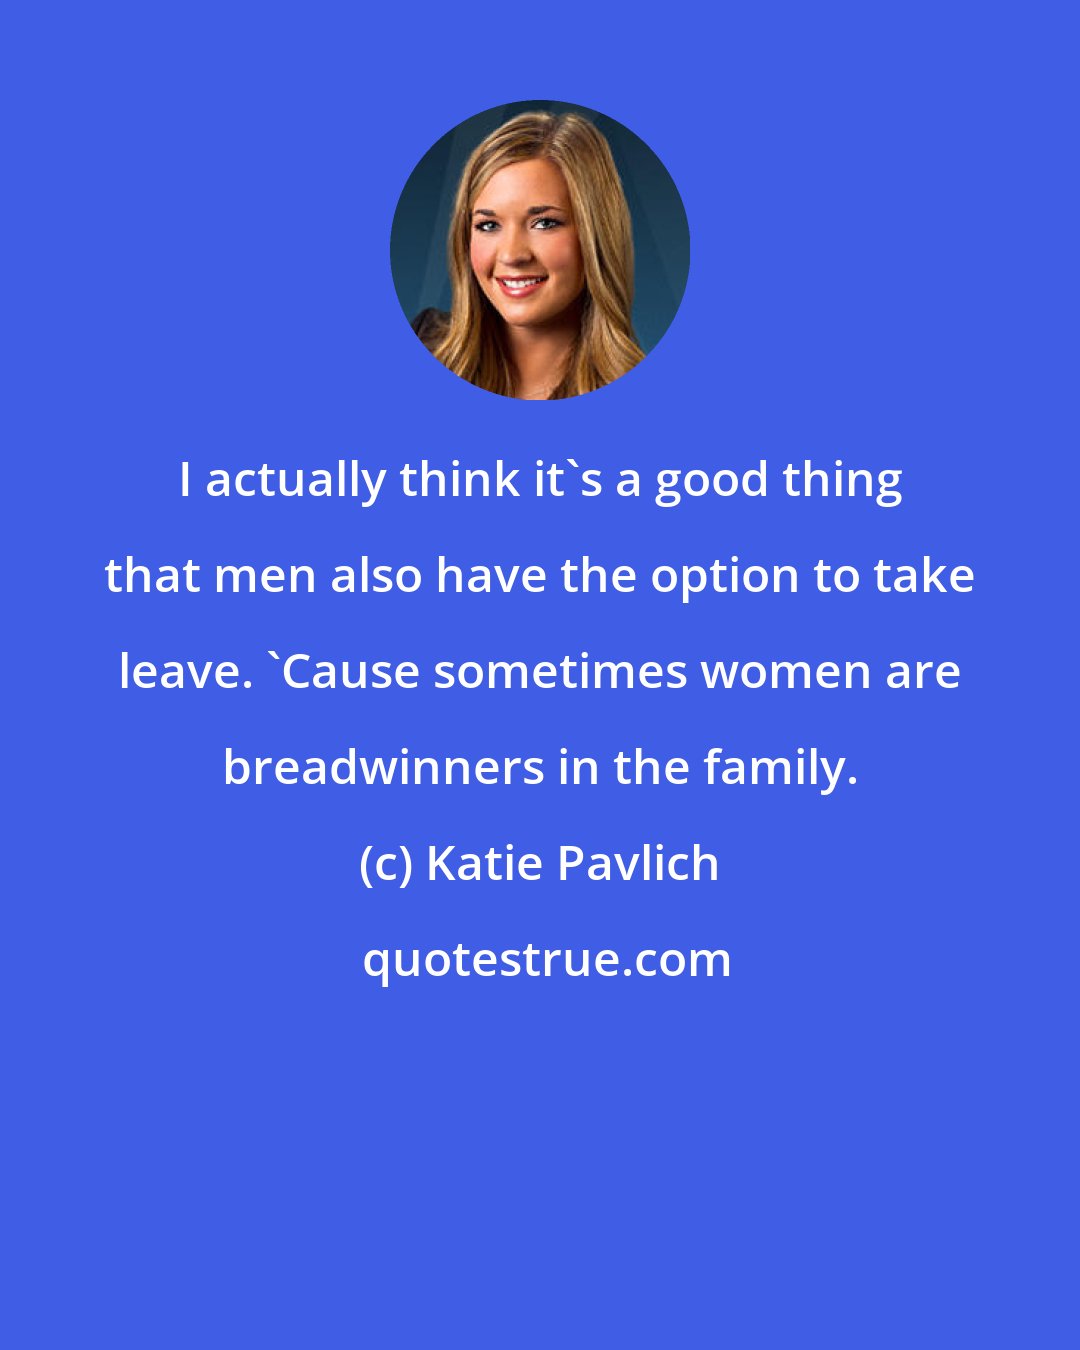 Katie Pavlich: I actually think it's a good thing that men also have the option to take leave. `Cause sometimes women are breadwinners in the family.